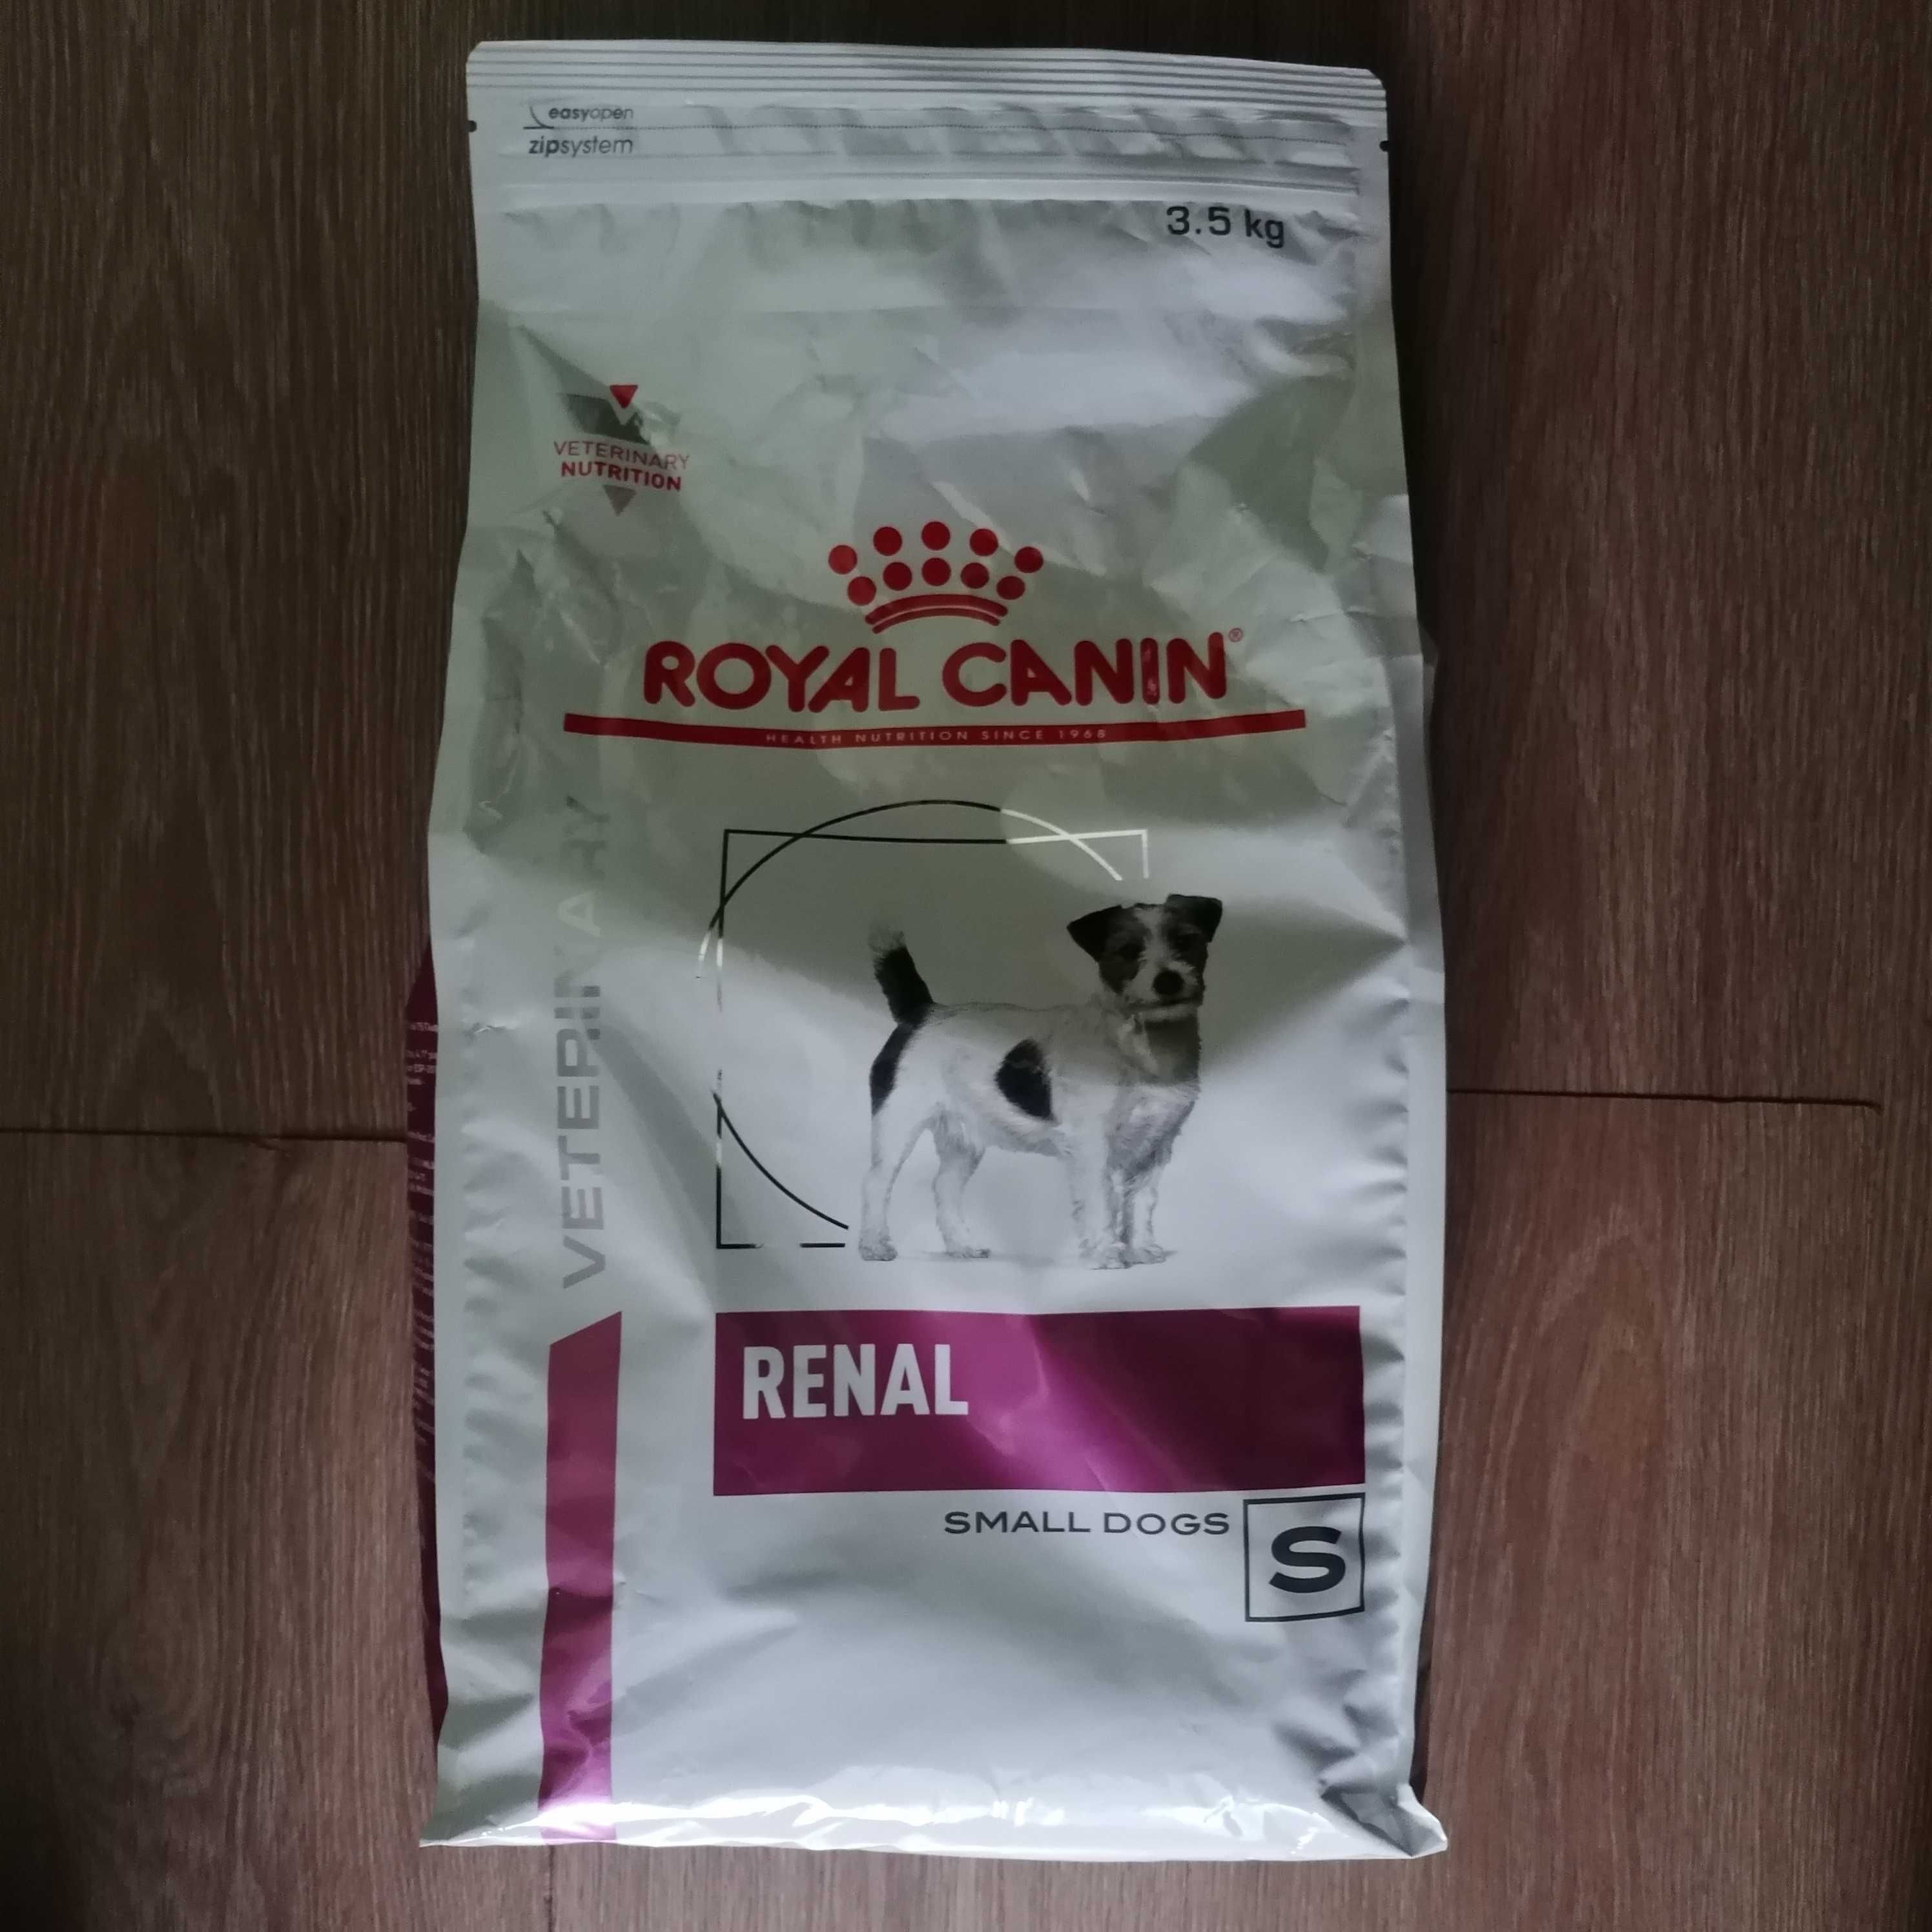 ROYAL CANIN Renal For Small Dogs - 3,5 kg - NOWE - charytatywnie